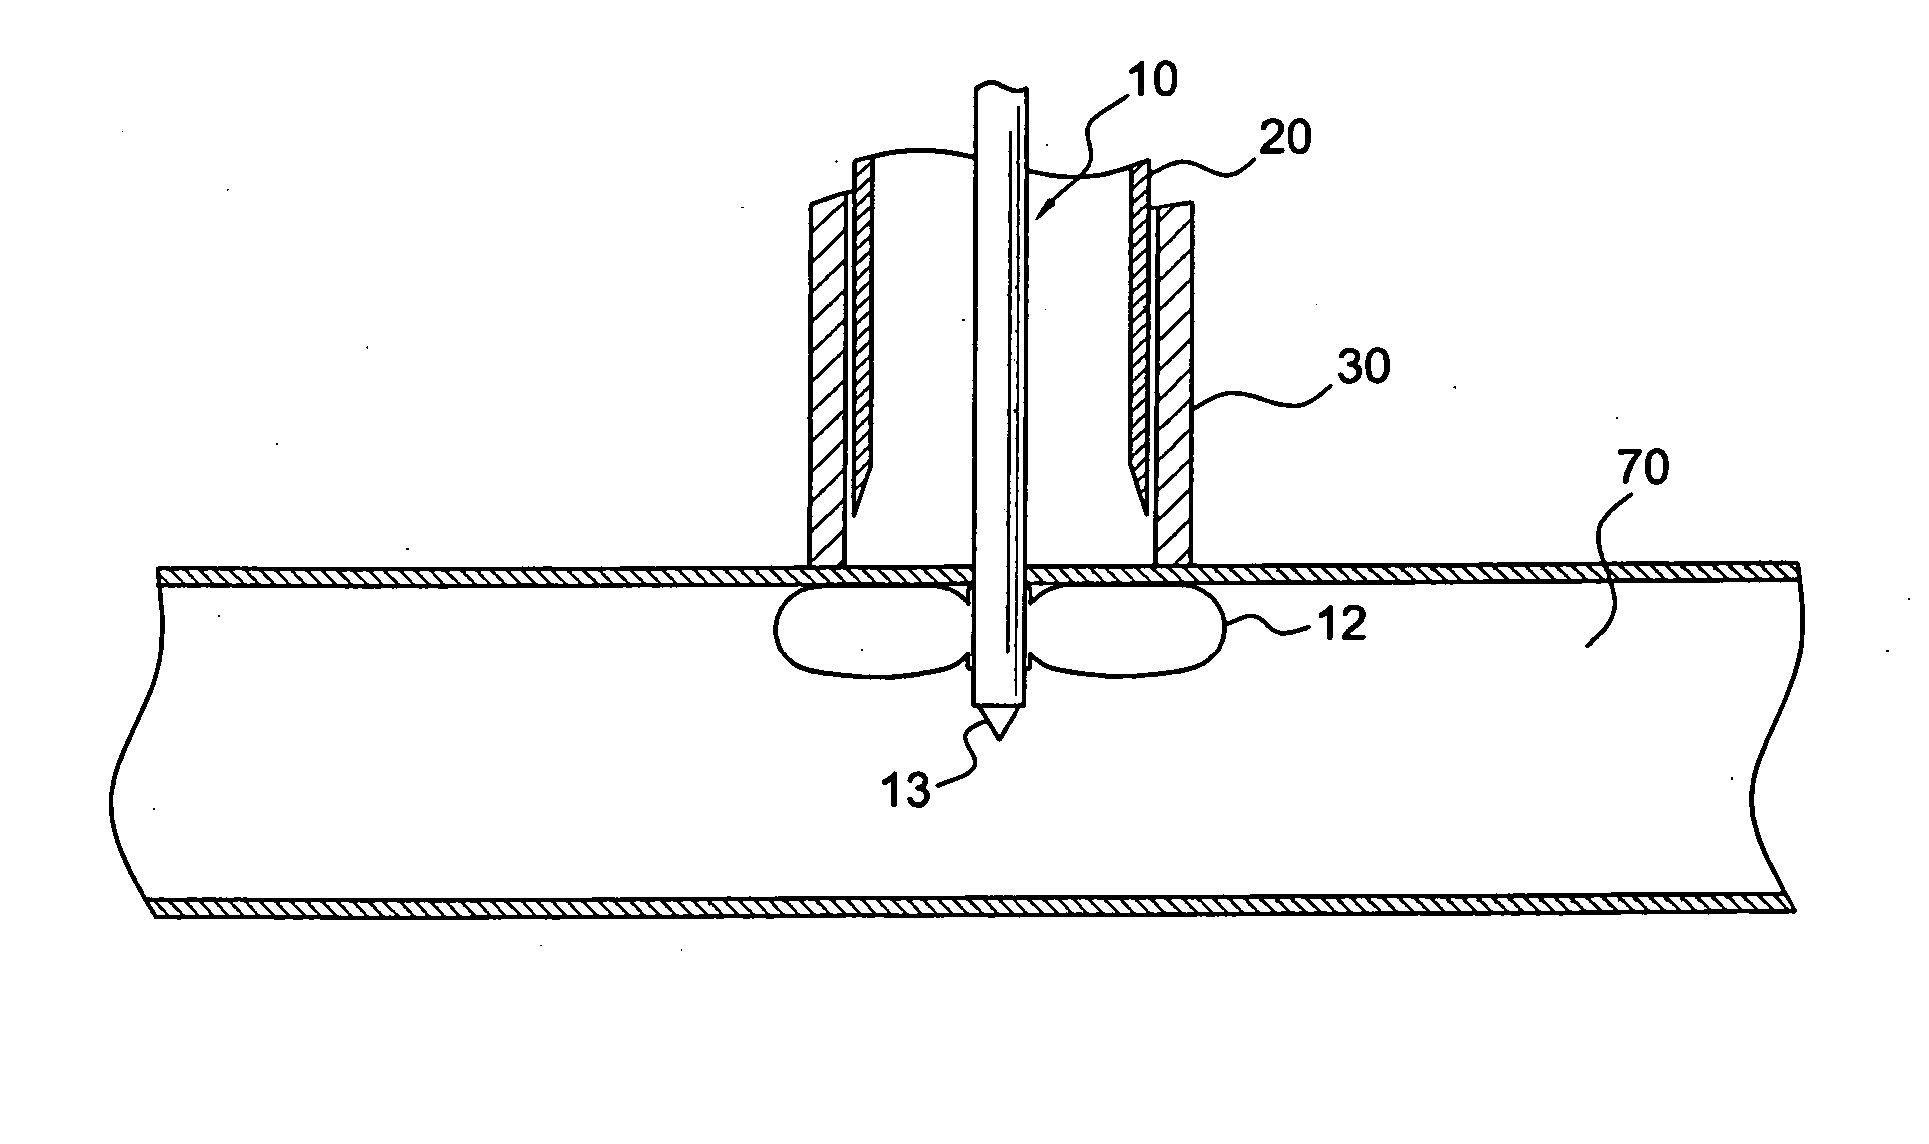 Apparatus and method for connecting a conduit to a hollow vessel